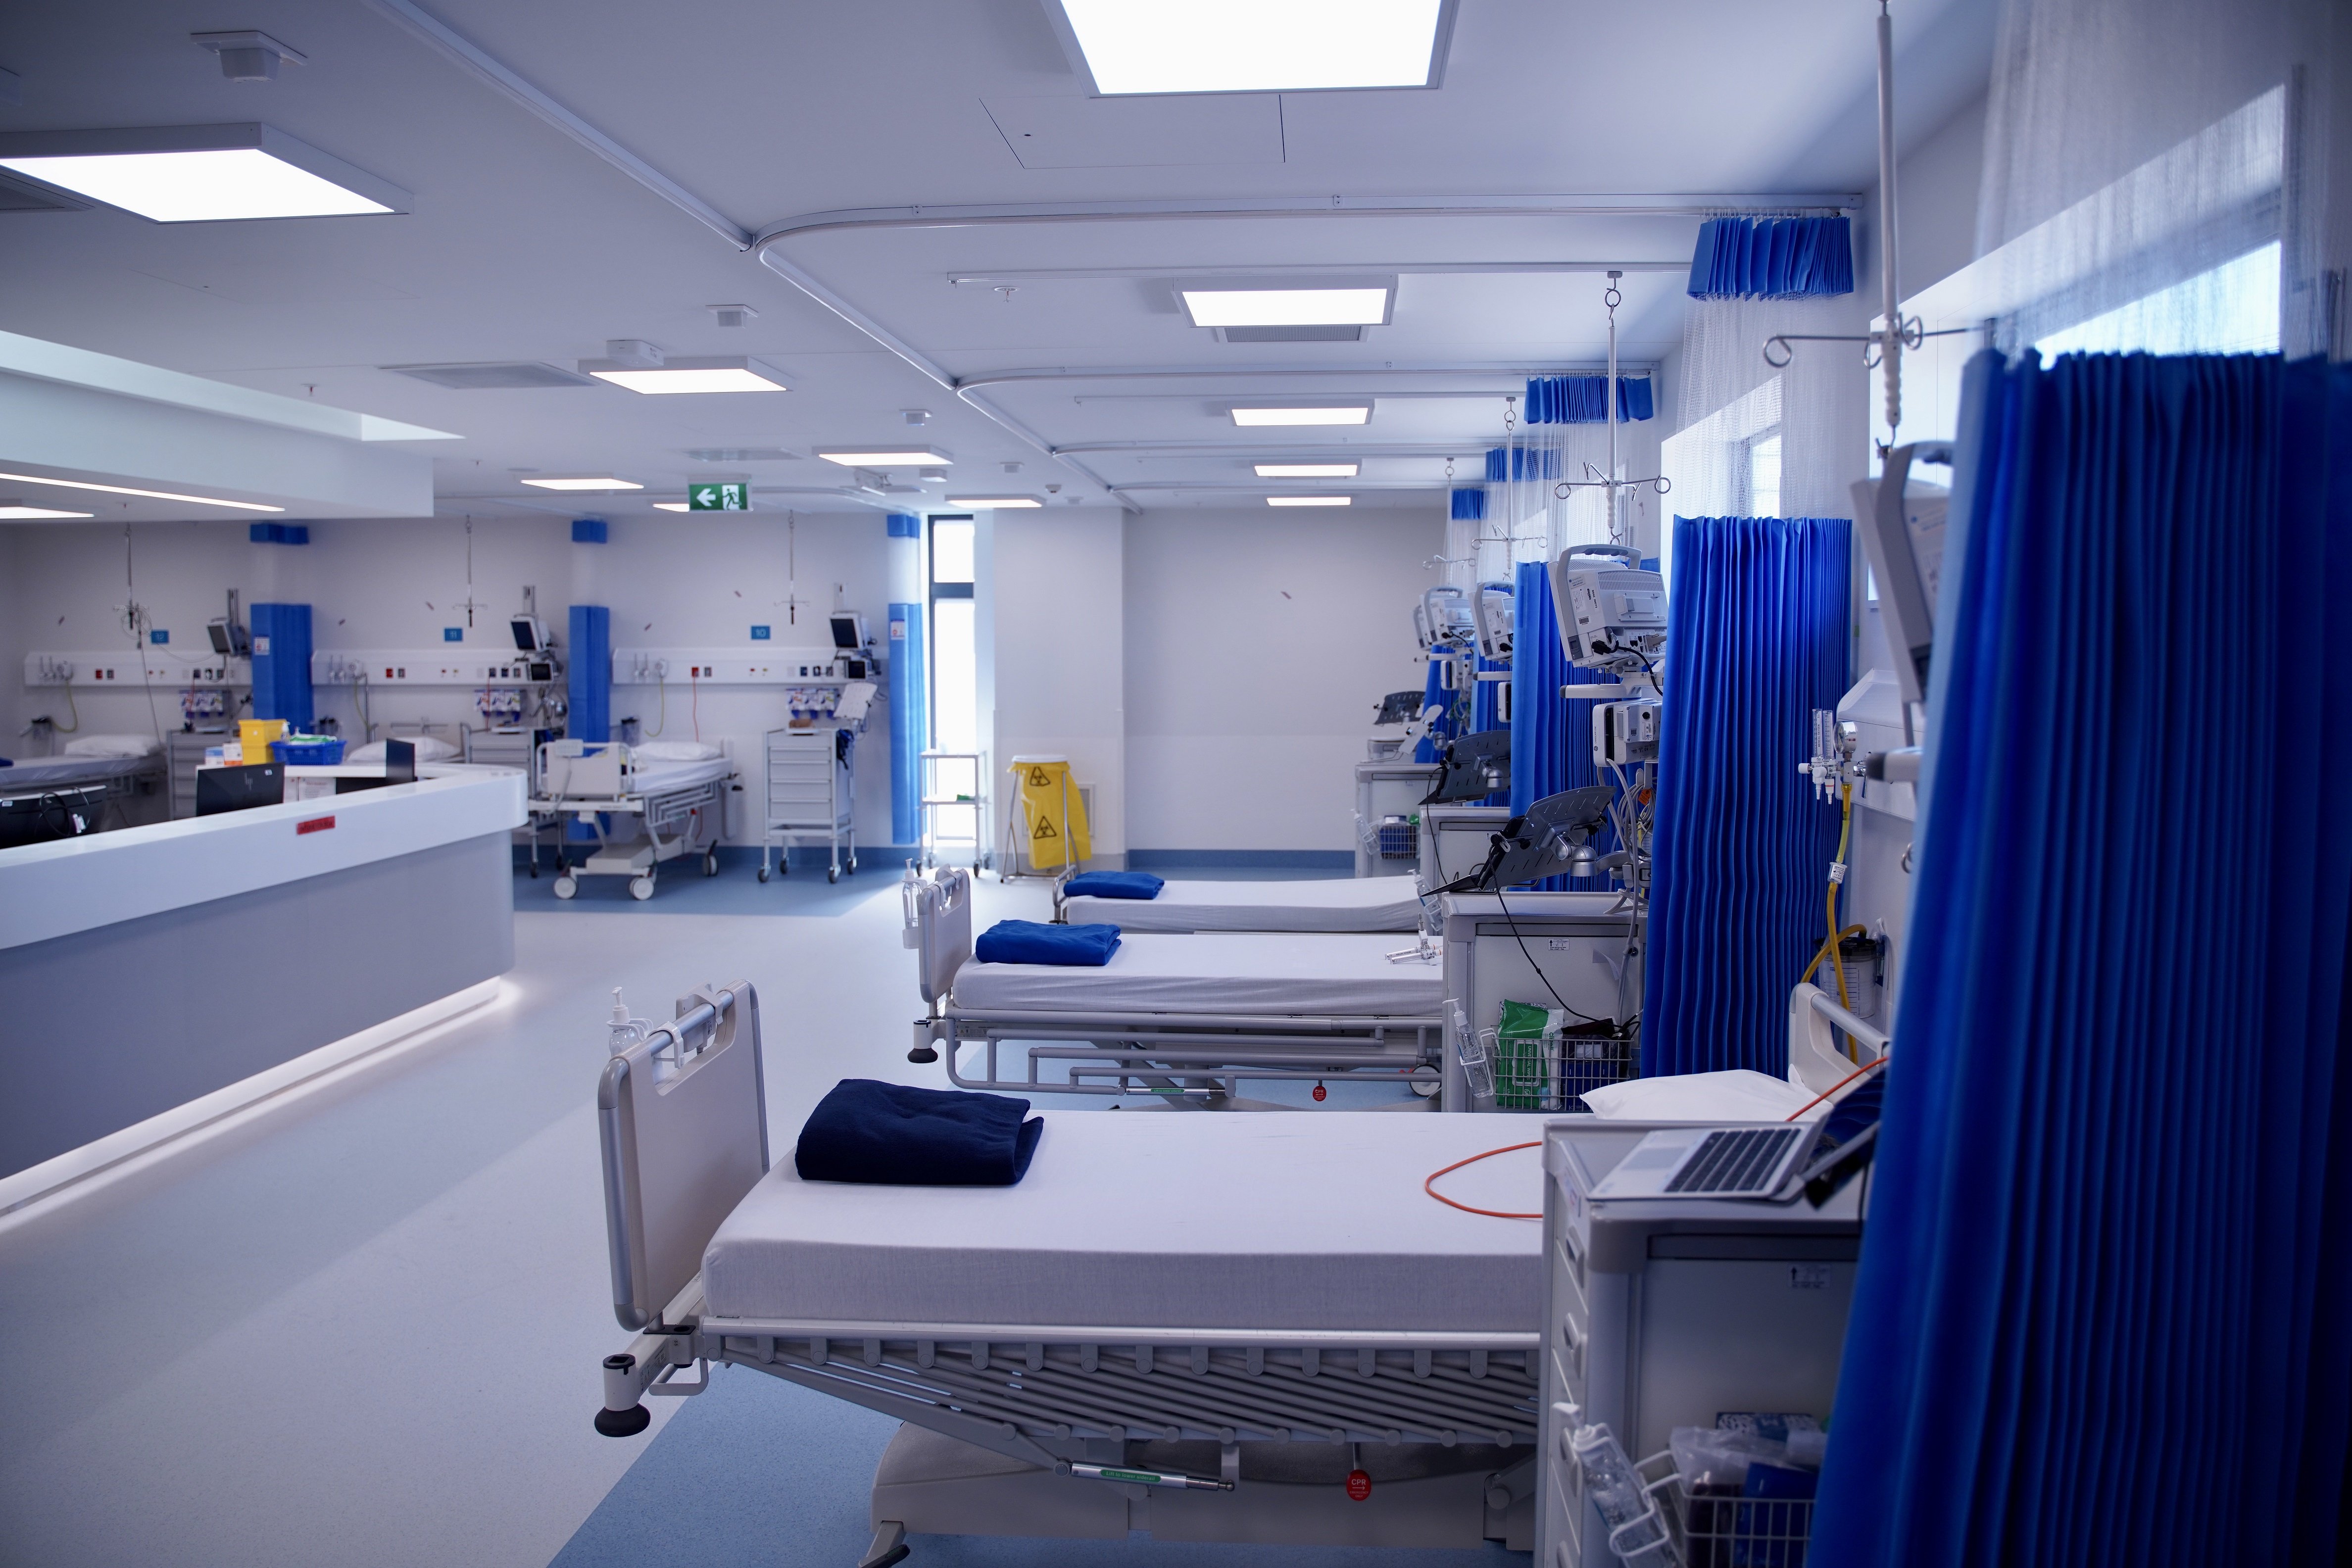 One of the new areas in the expanded Southern Cross Healthcare hospital in New Plymouth